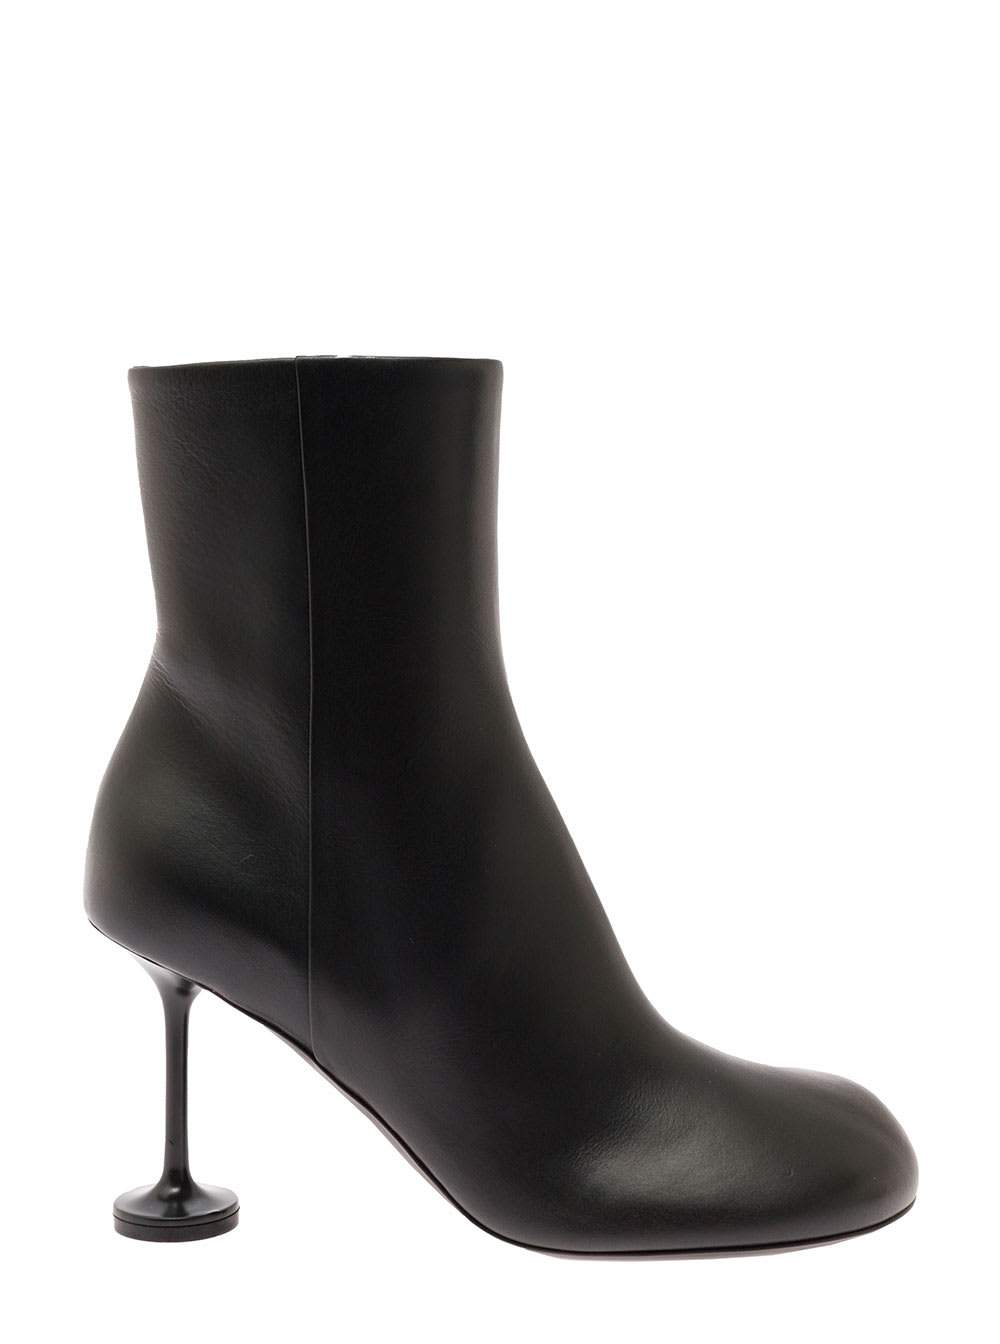 Balenciaga Black Lady Booties In Leather With 90 Mm Champagne Heel Balenciaga Woman